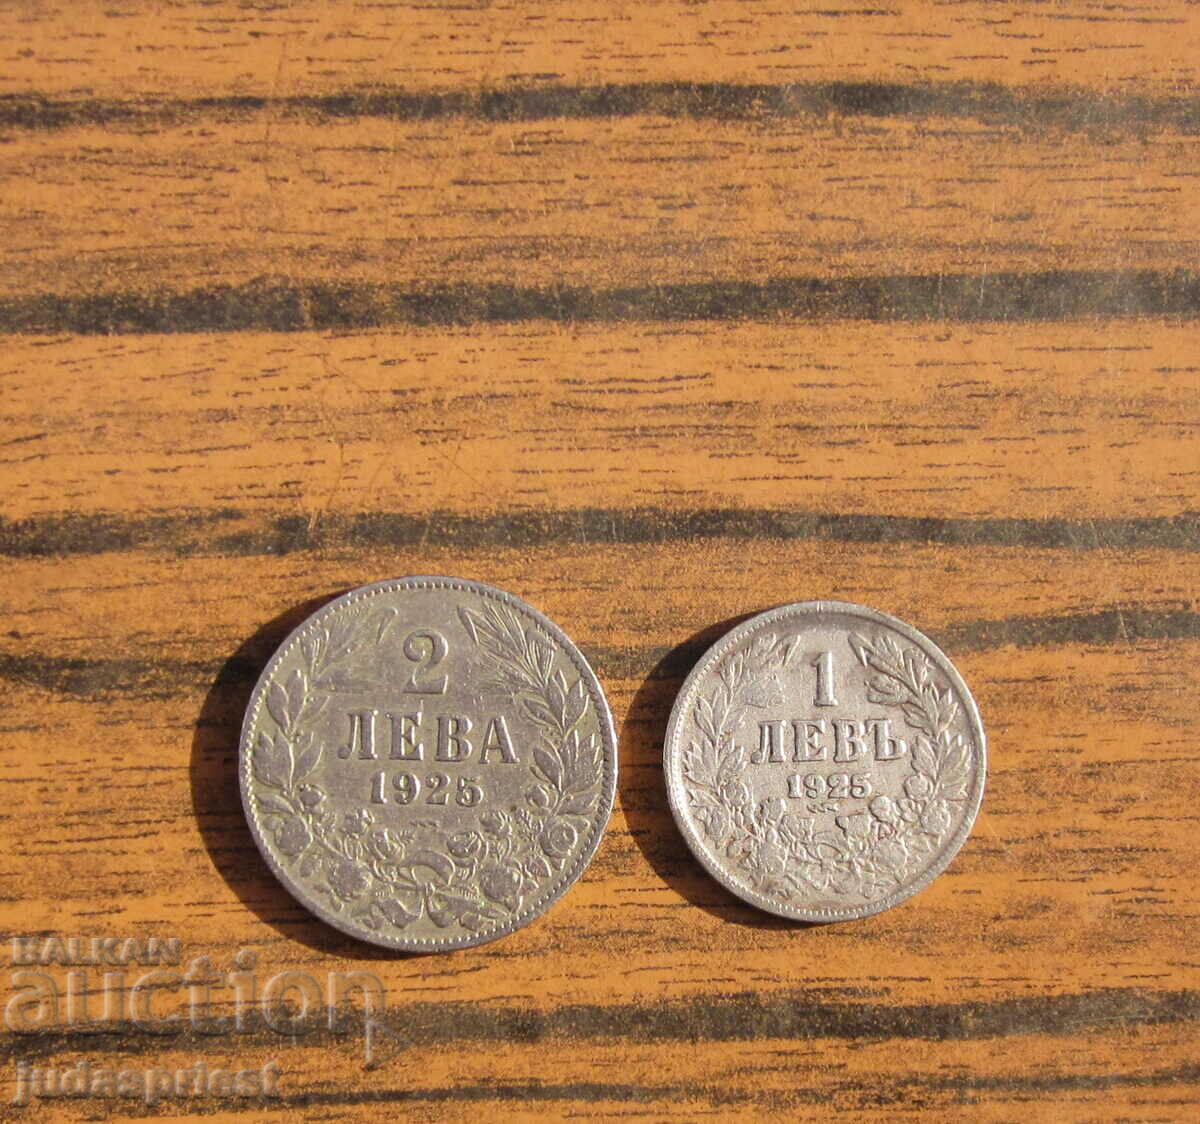 Kingdom of Bulgaria coins 1 lev and 2 lev 1925 with a line